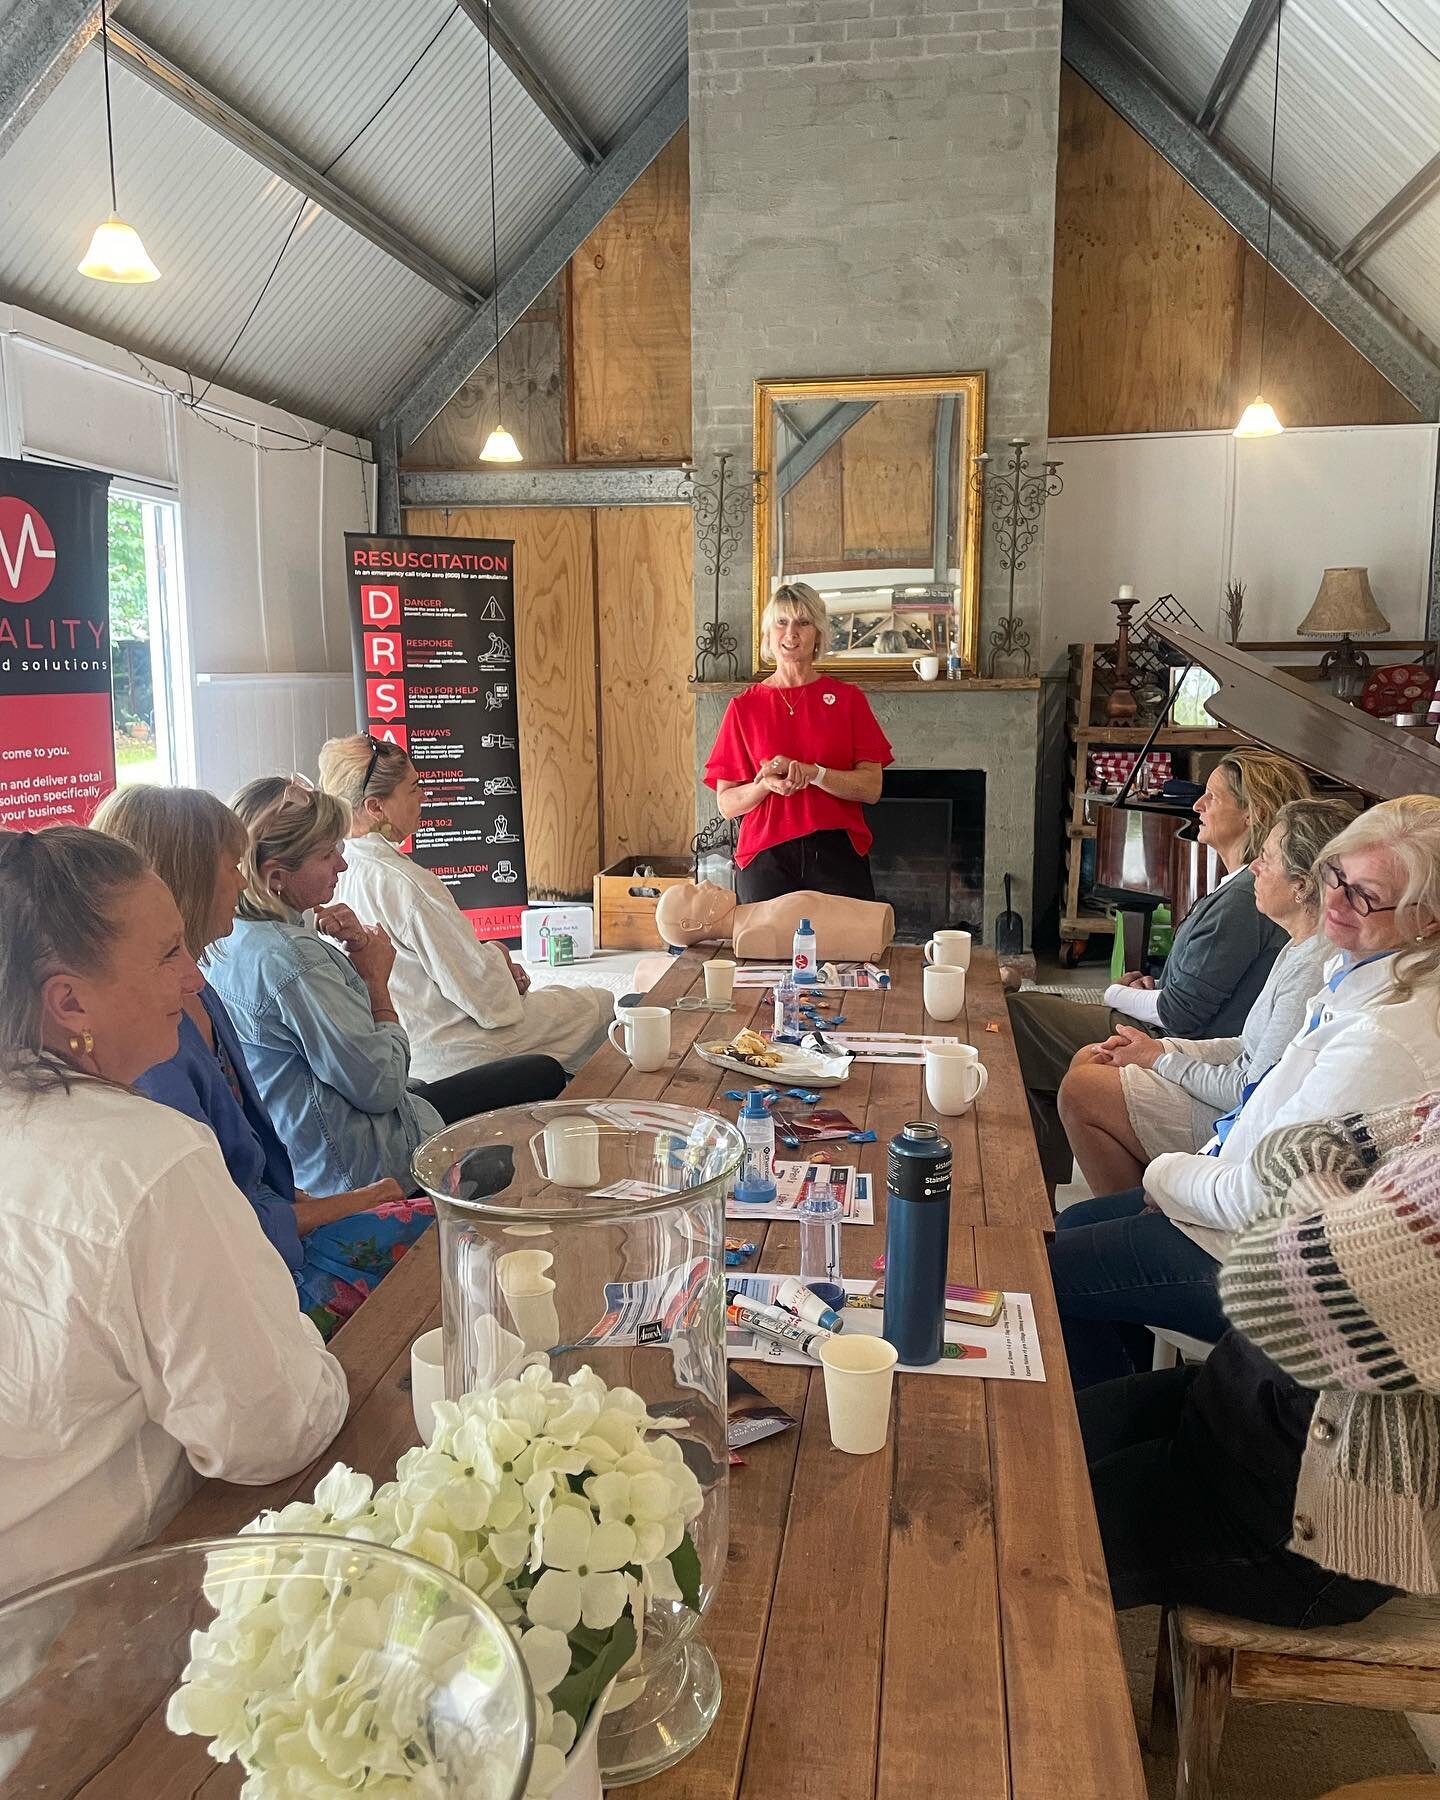 Fantastic day here at Heart of Gold Vineyard with  @vitalityfas providing the tools to administer cardiopulmonary resuscitation and other great first aid tips. Such critically important skills that we should all have in our tool box! Thanks Sue @vita